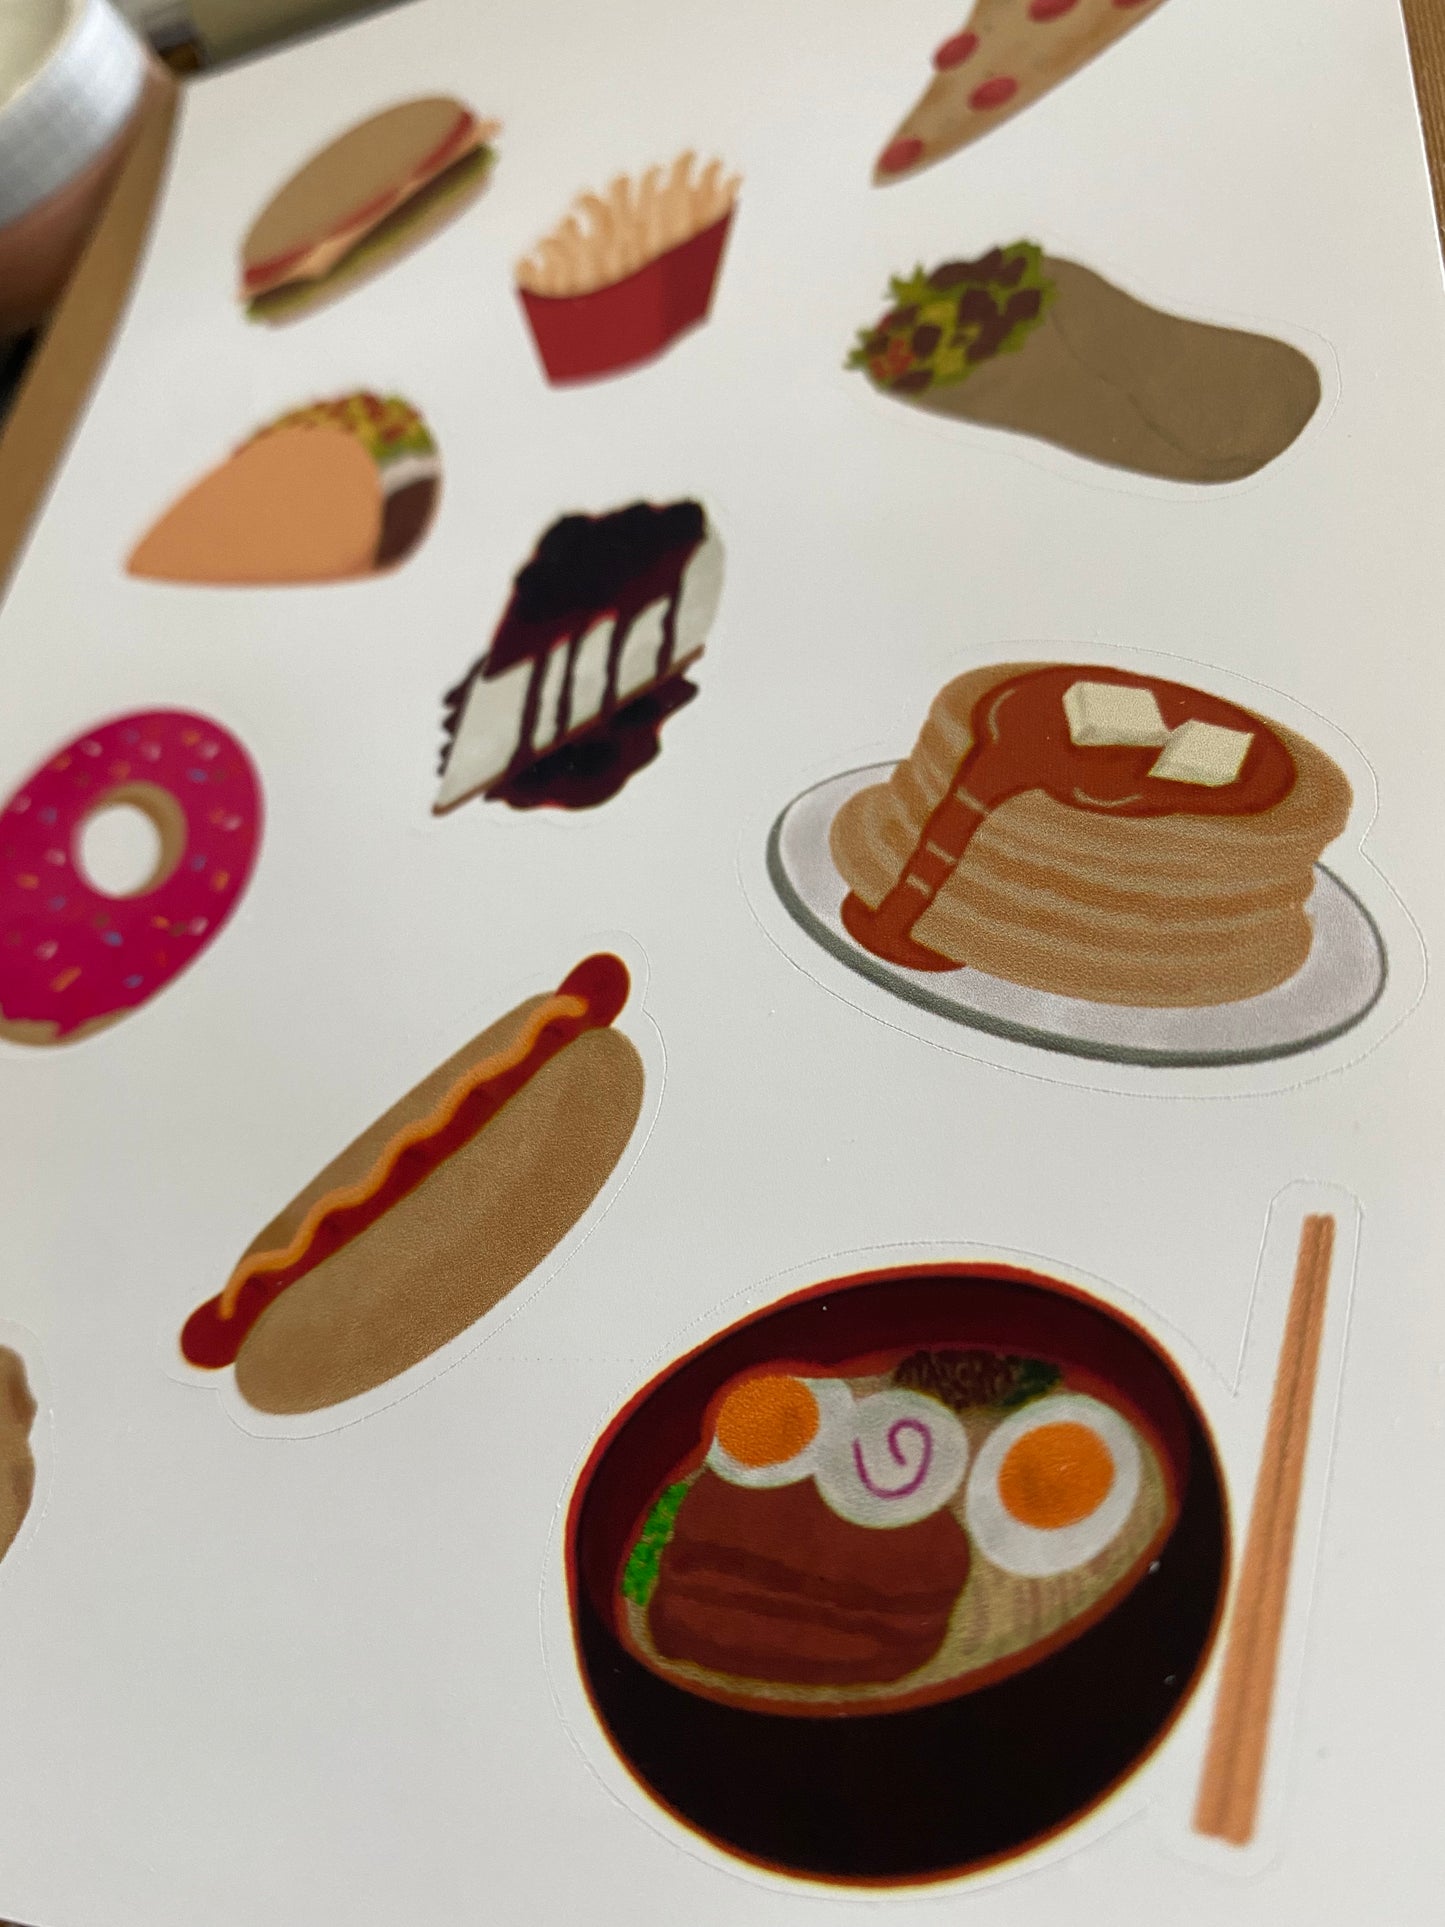 A closer look of comfort food journal sticker showing ramen, hotdog, pancakes, cheesecake, donut, burrito, tacos, fries, pizza and burger